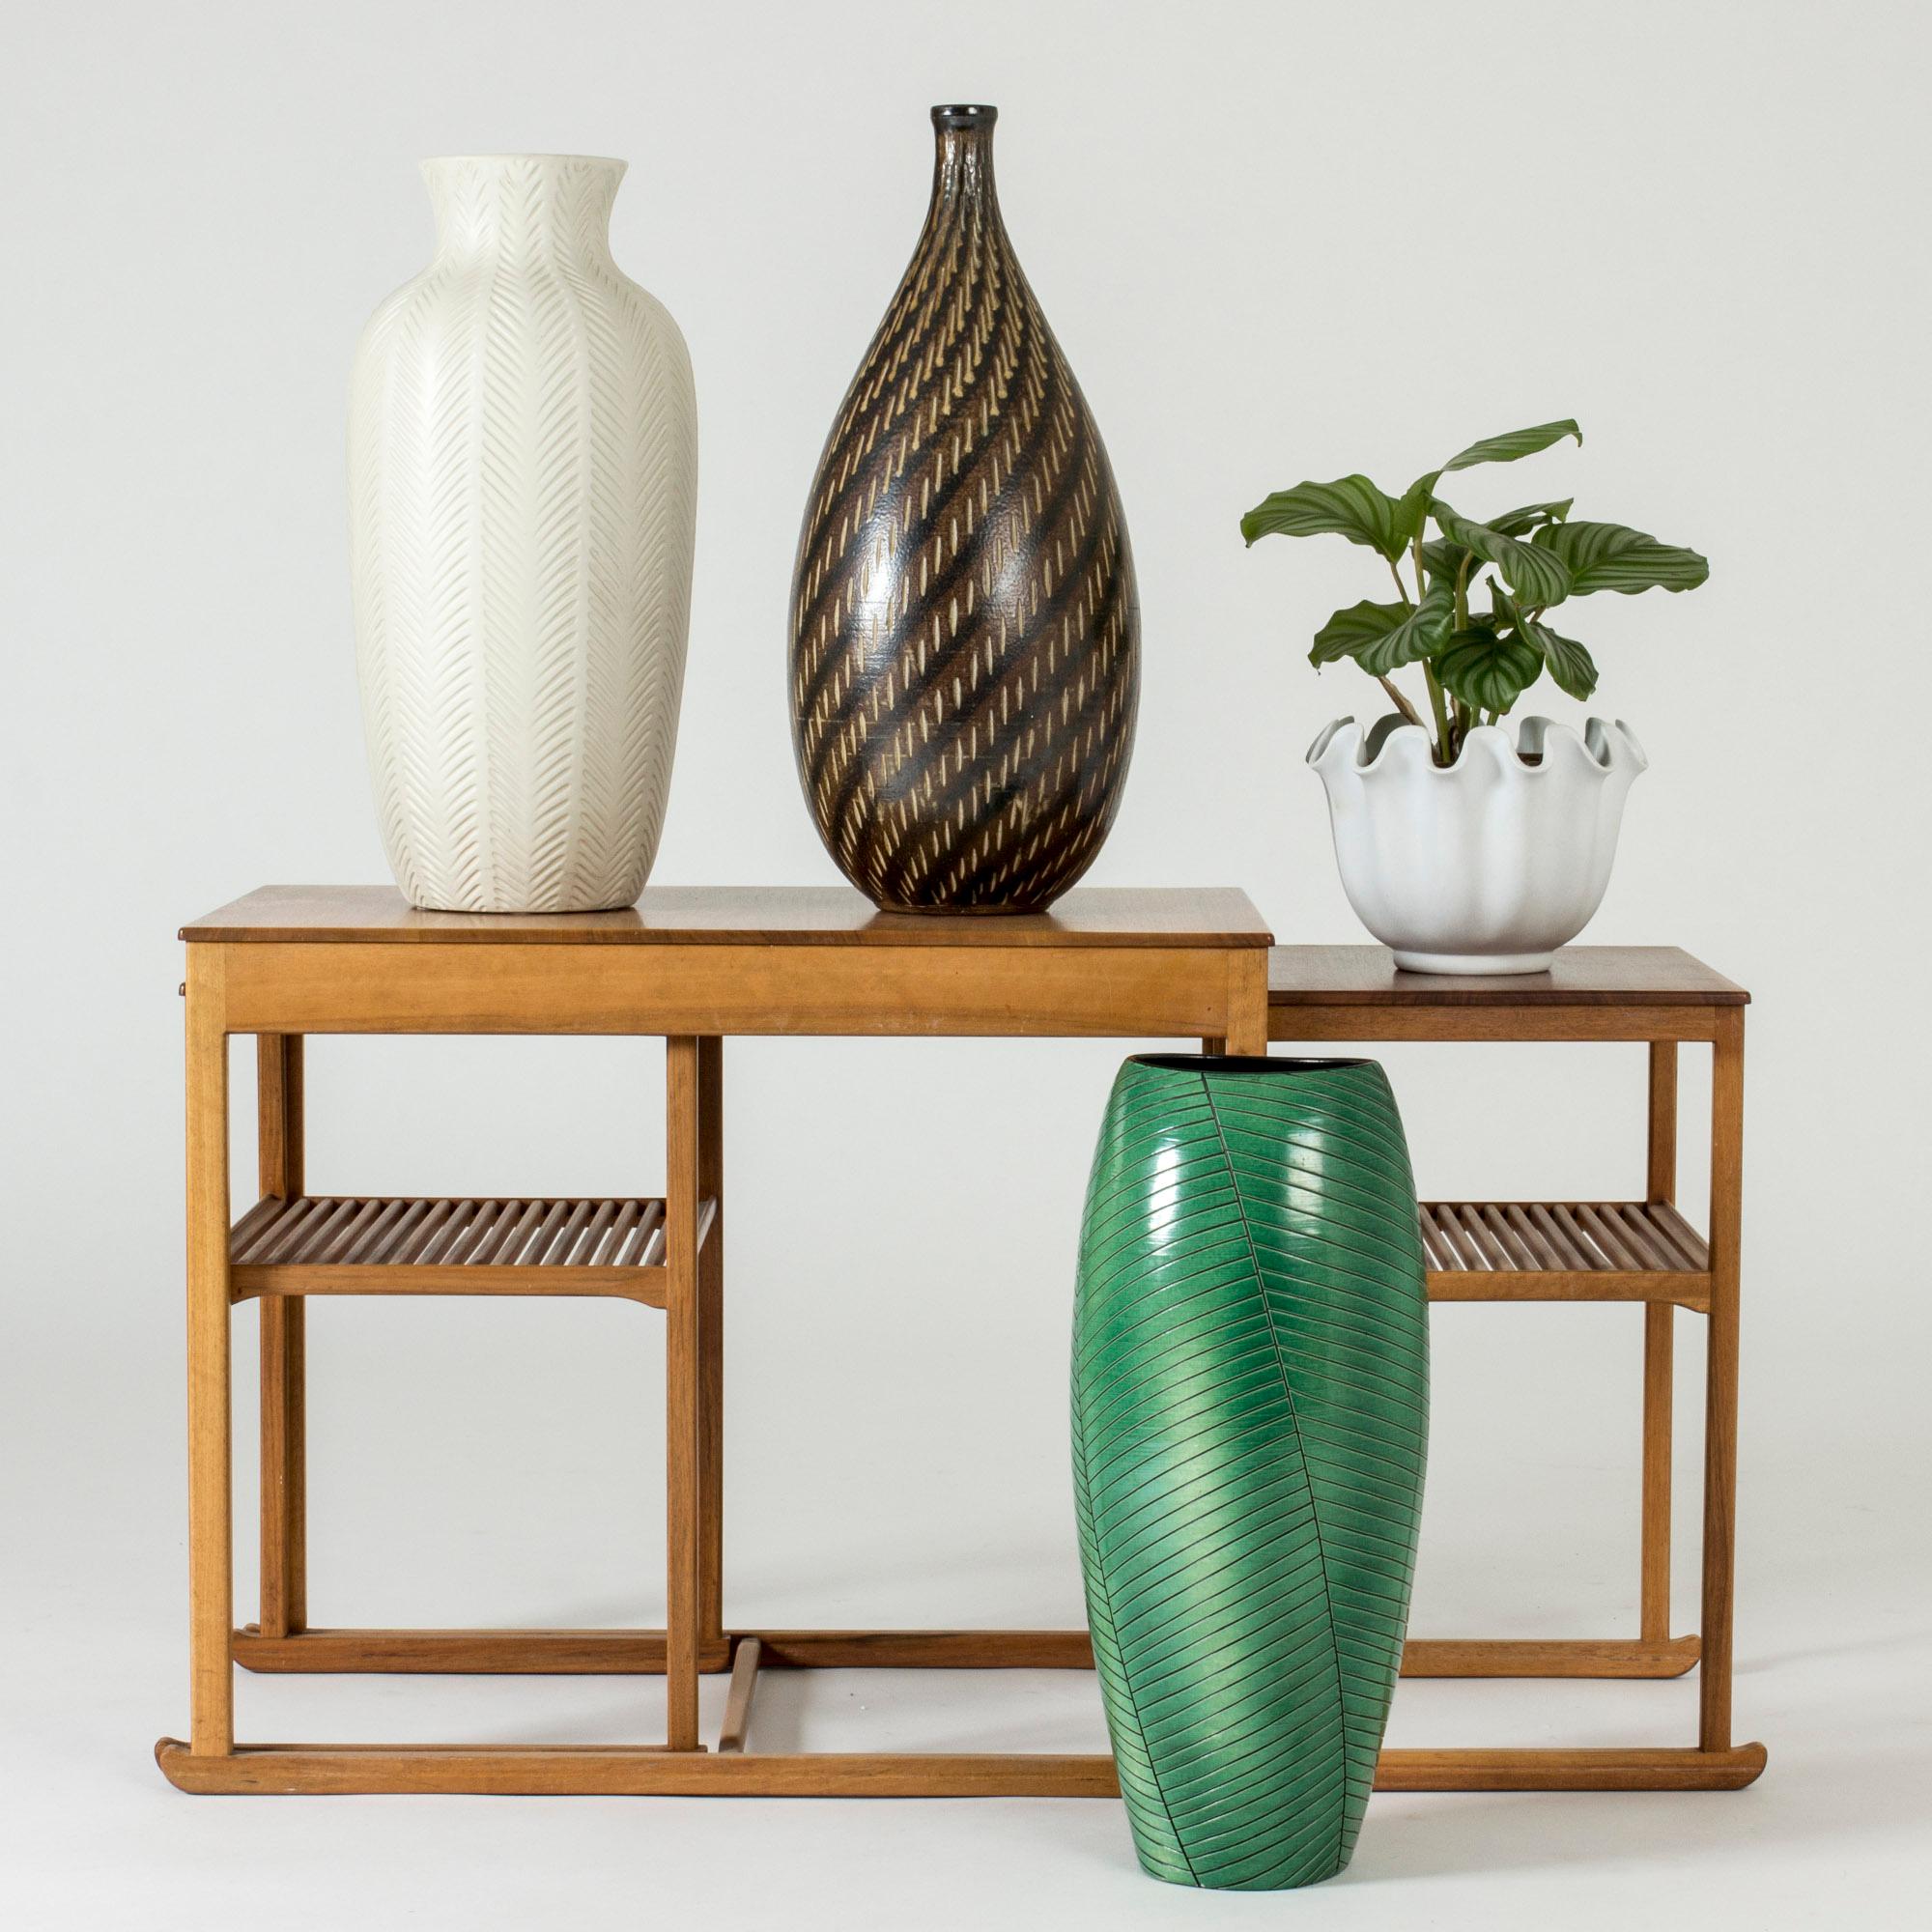 Stoneware floor vase from Uppsala-Ekeby, in an elegant slightly asymmetric form with a leaflike decor. Vibrant green color and graphic decor.